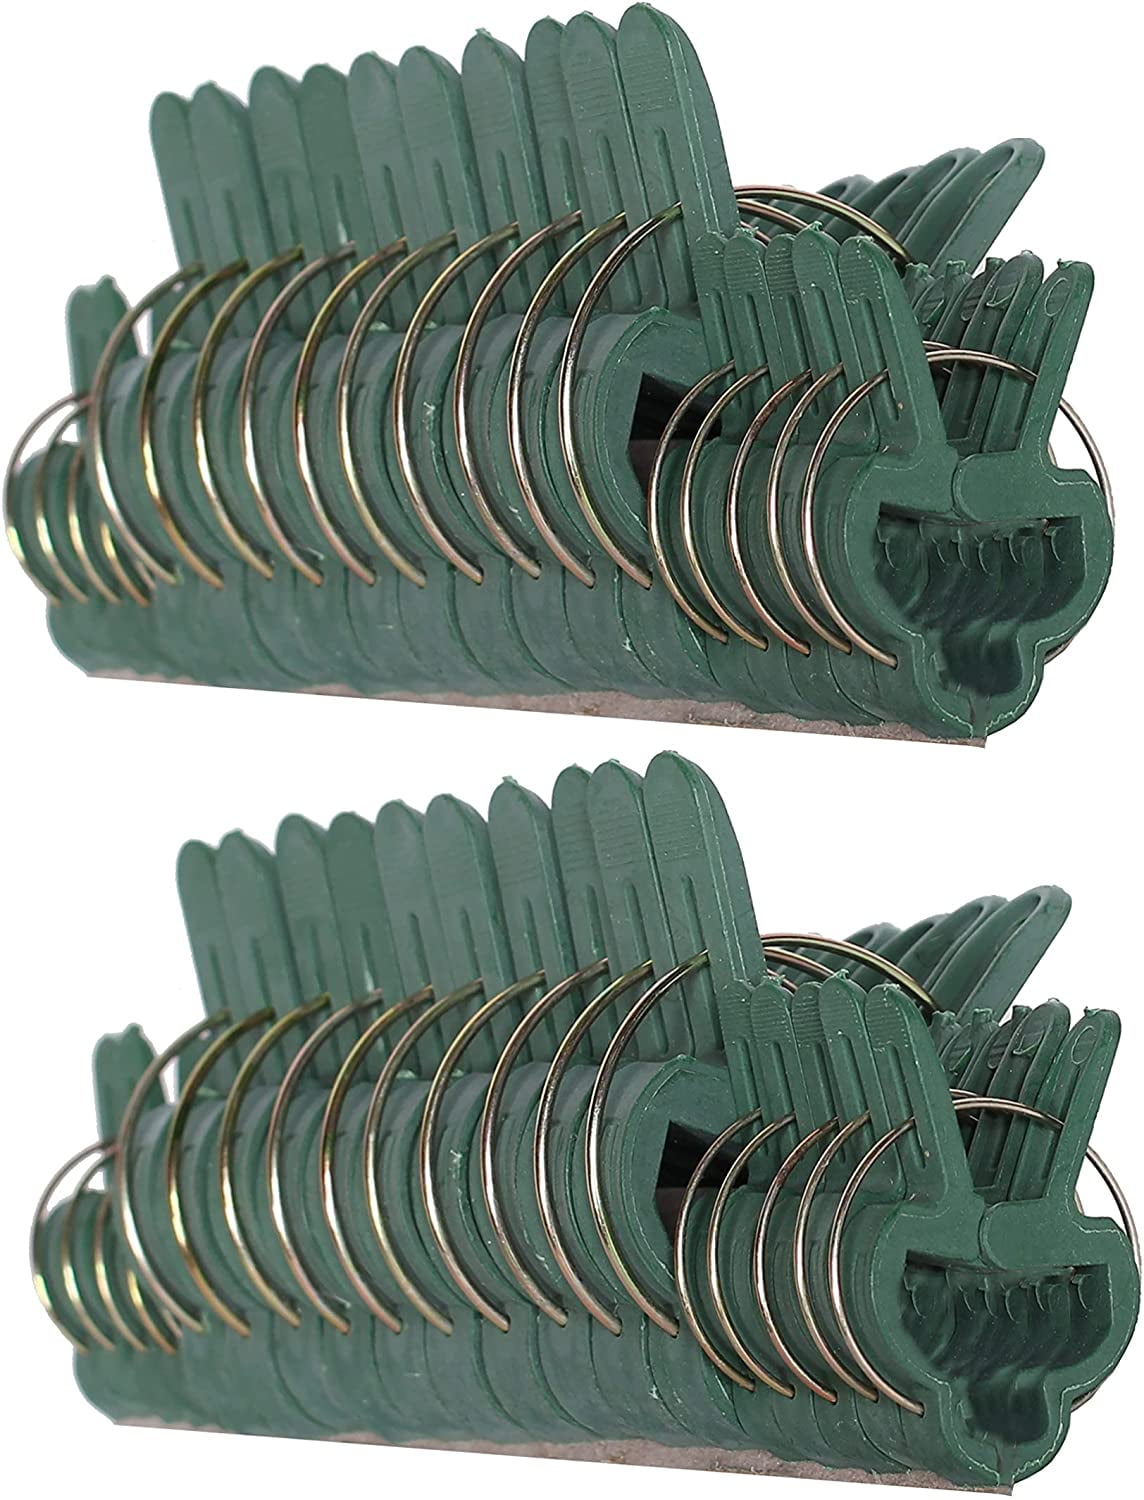 Artrylin 40 Pcs Plant Support Clips Flower And Vine Garden Tomato